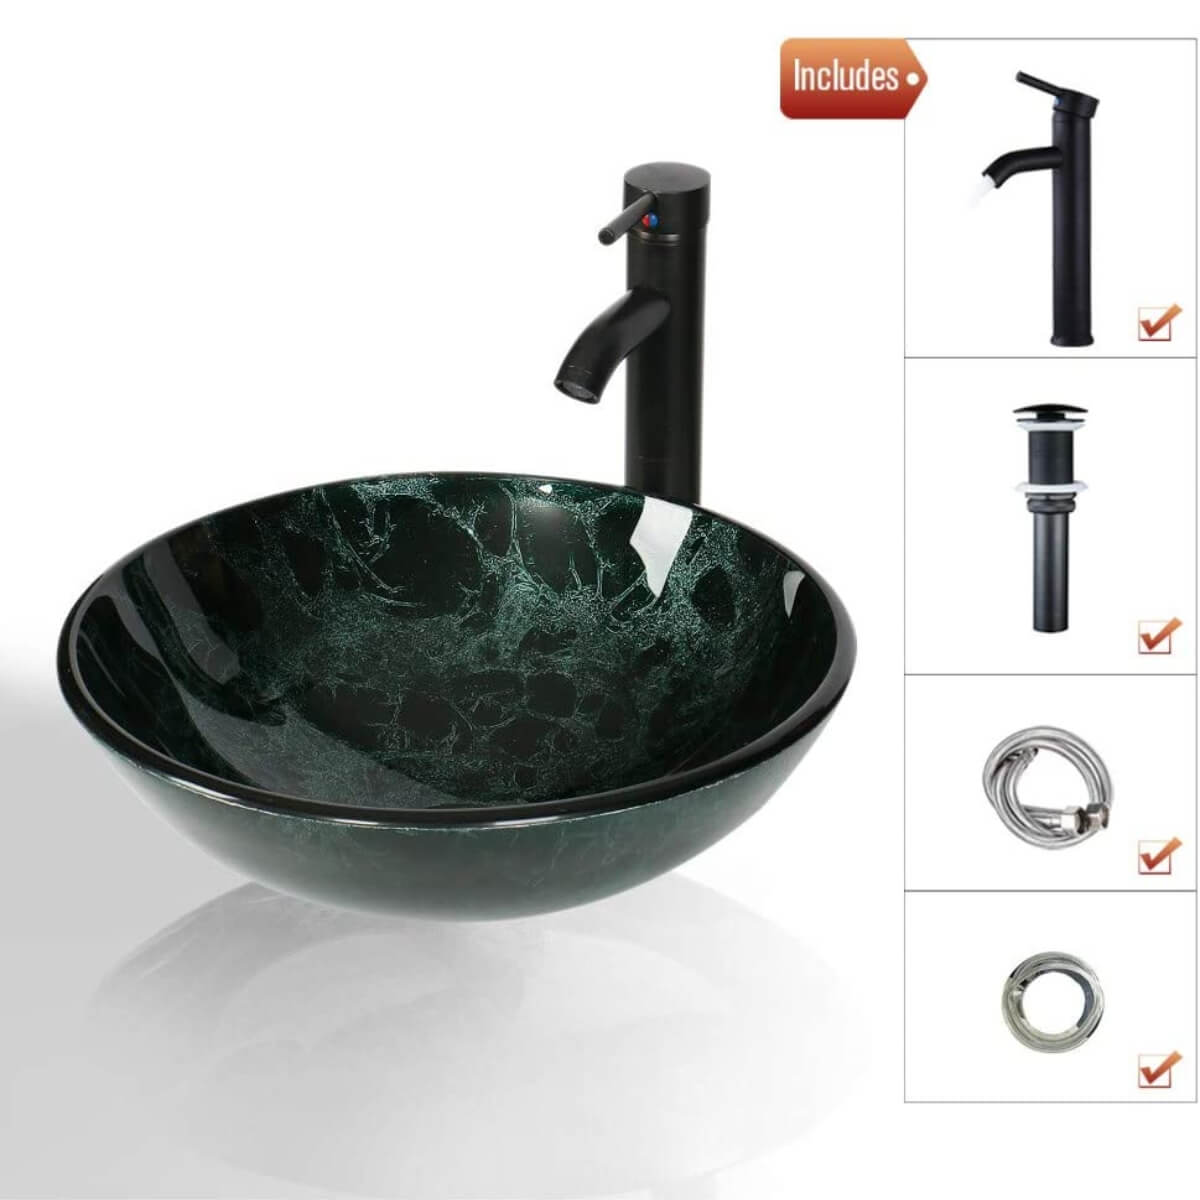 Elecwish Vessel Sinks Bathroom Artistic Vessel Sink Glass Bowl Faucet Drain Combo,Green includes complete parts